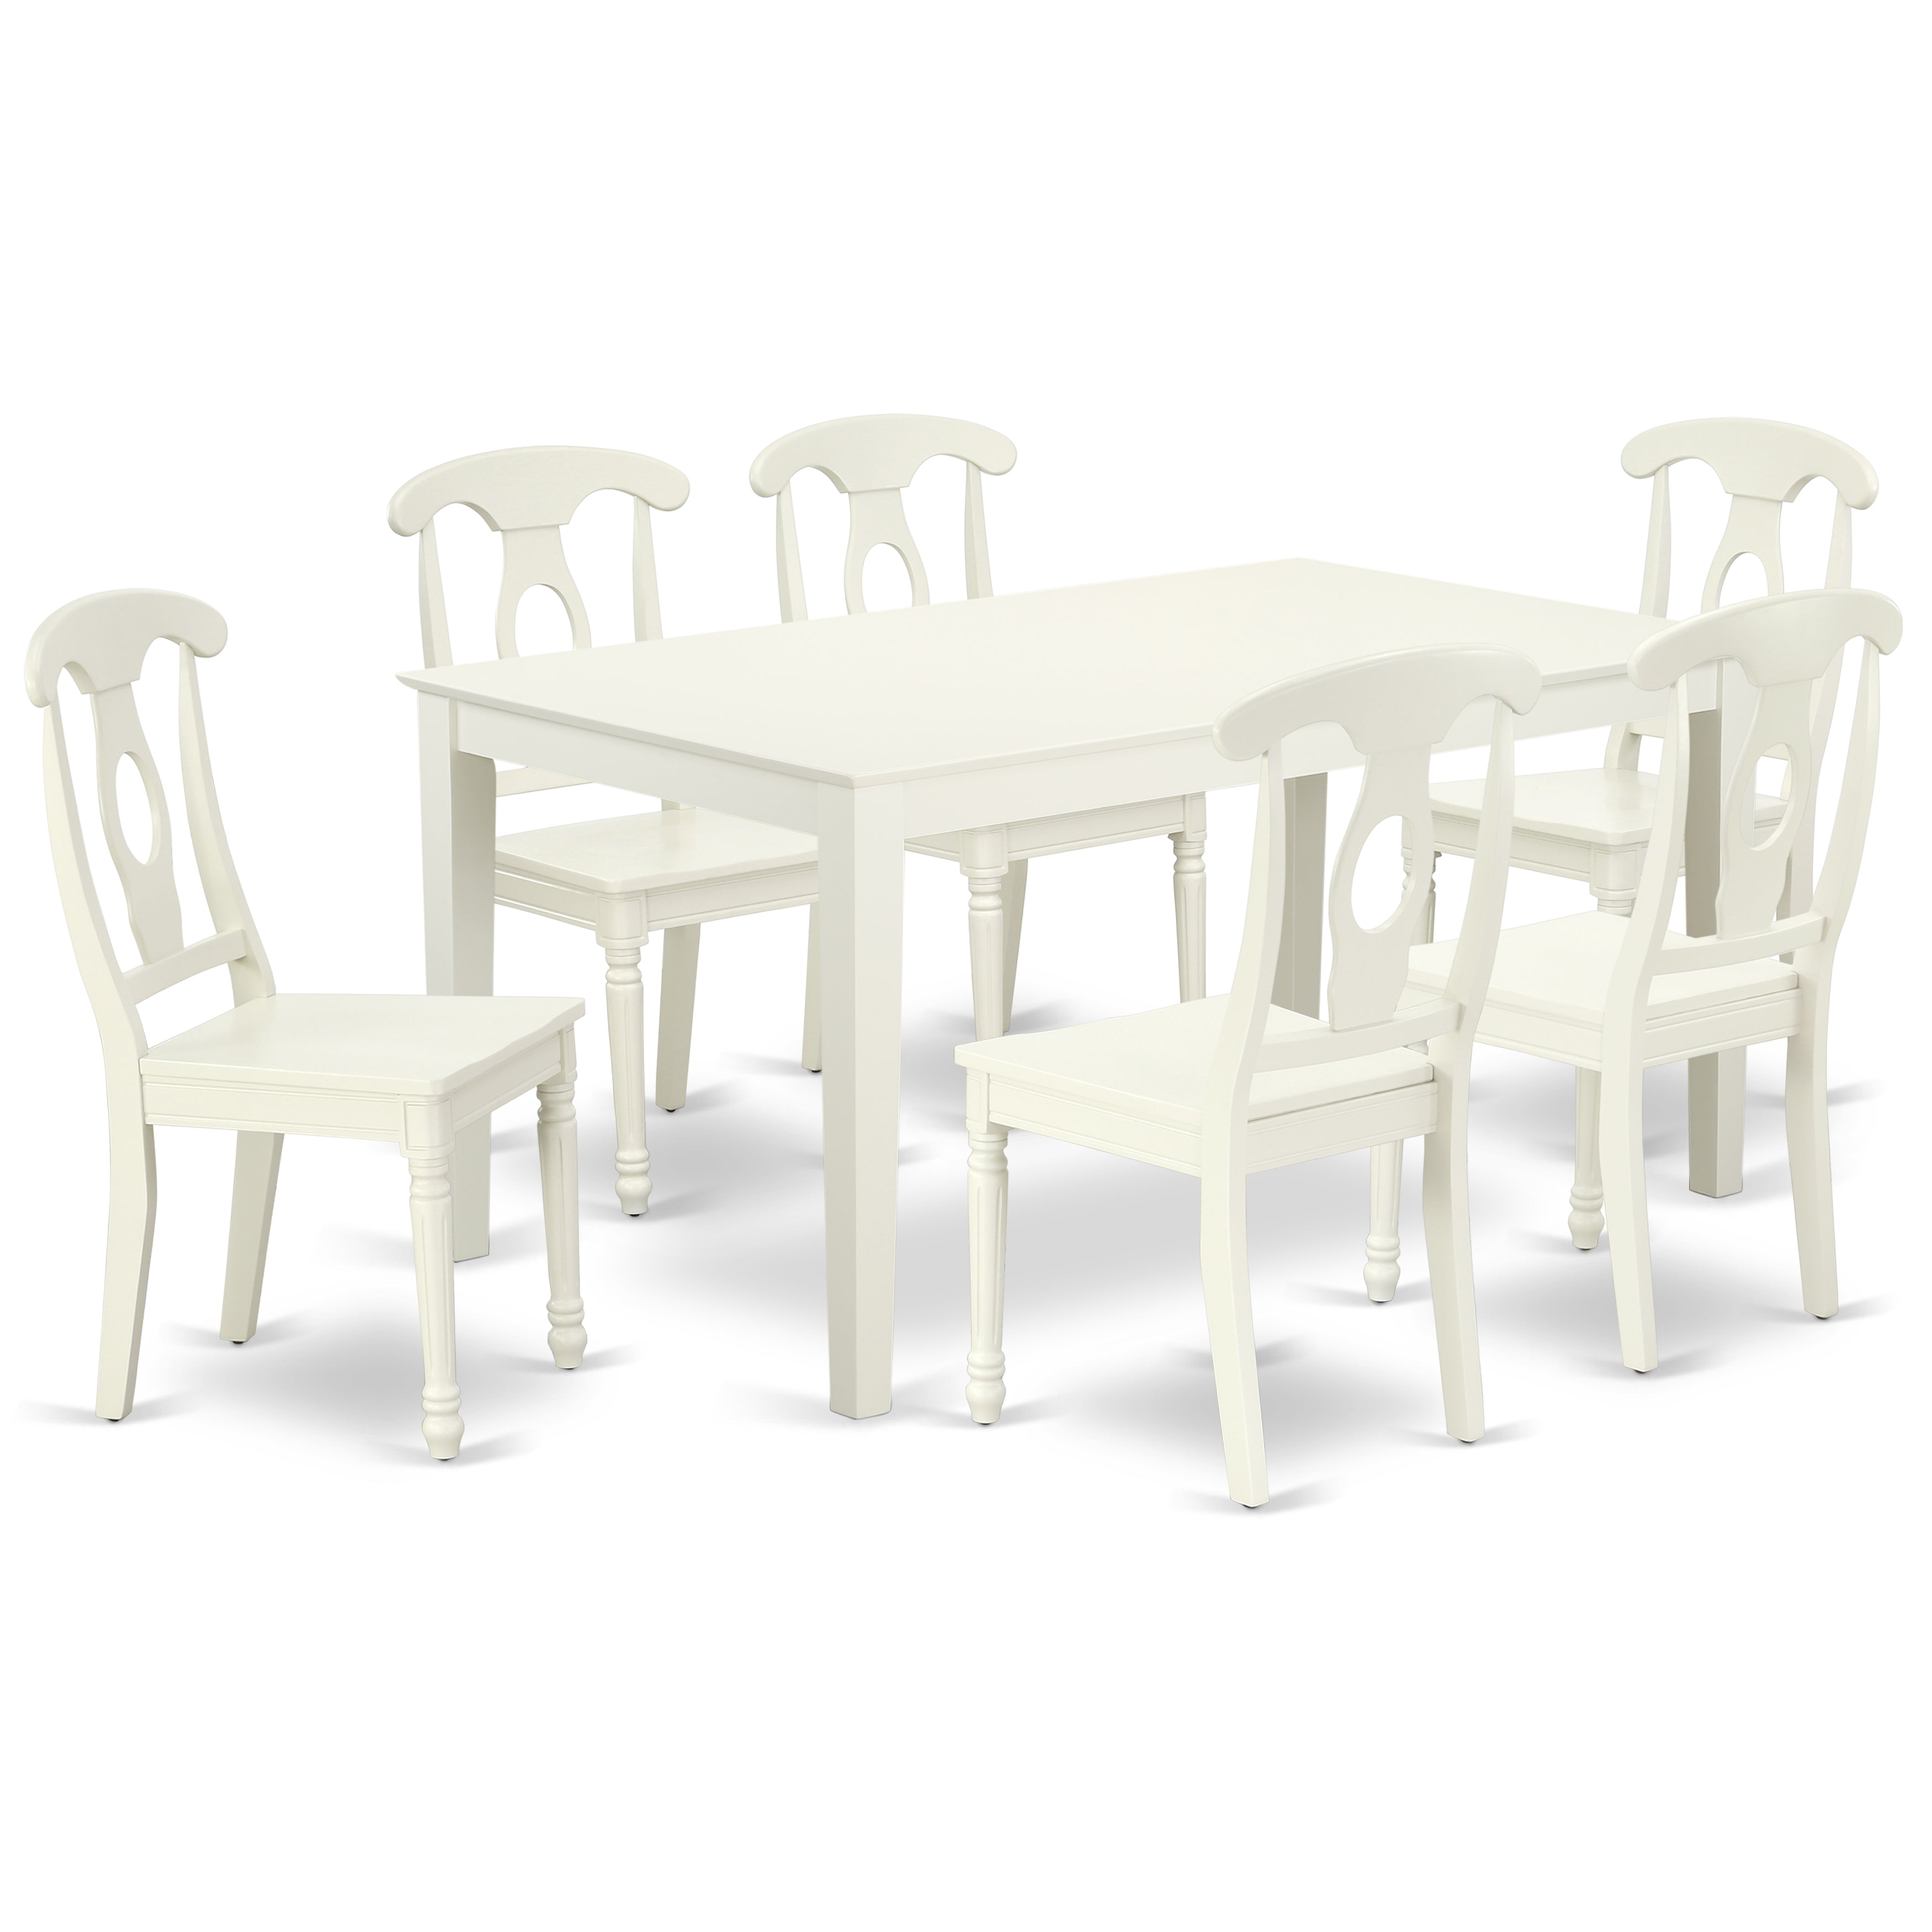 CAKE7-LWH-W 7PC Rectangular 60 inch Table and 6 Panel Back Chairs